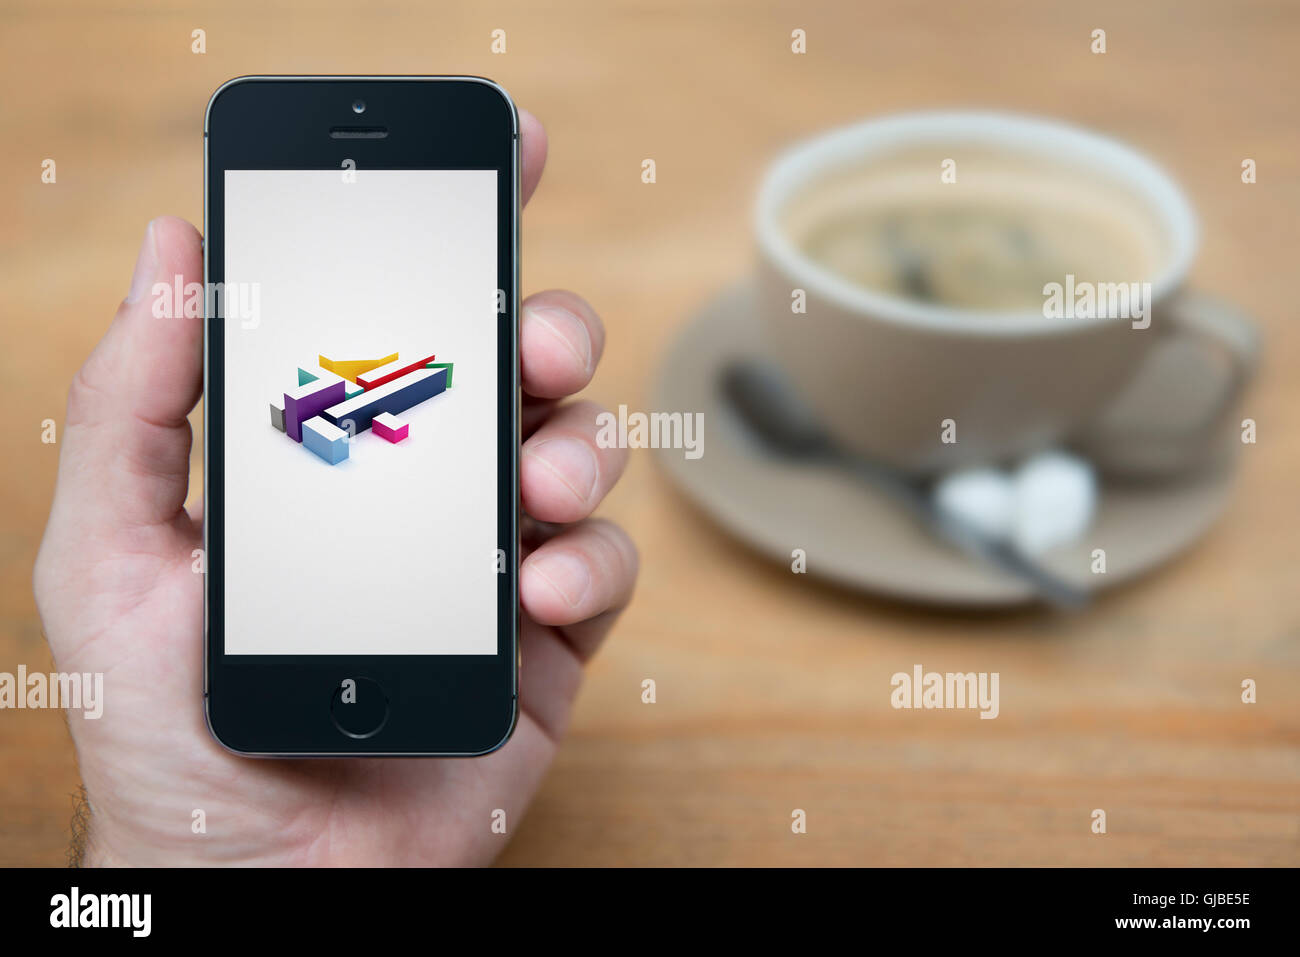 A man looks at his iPhone which displays the Channel 4 logo, while sat with a cup of coffee (Editorial use only). Stock Photo